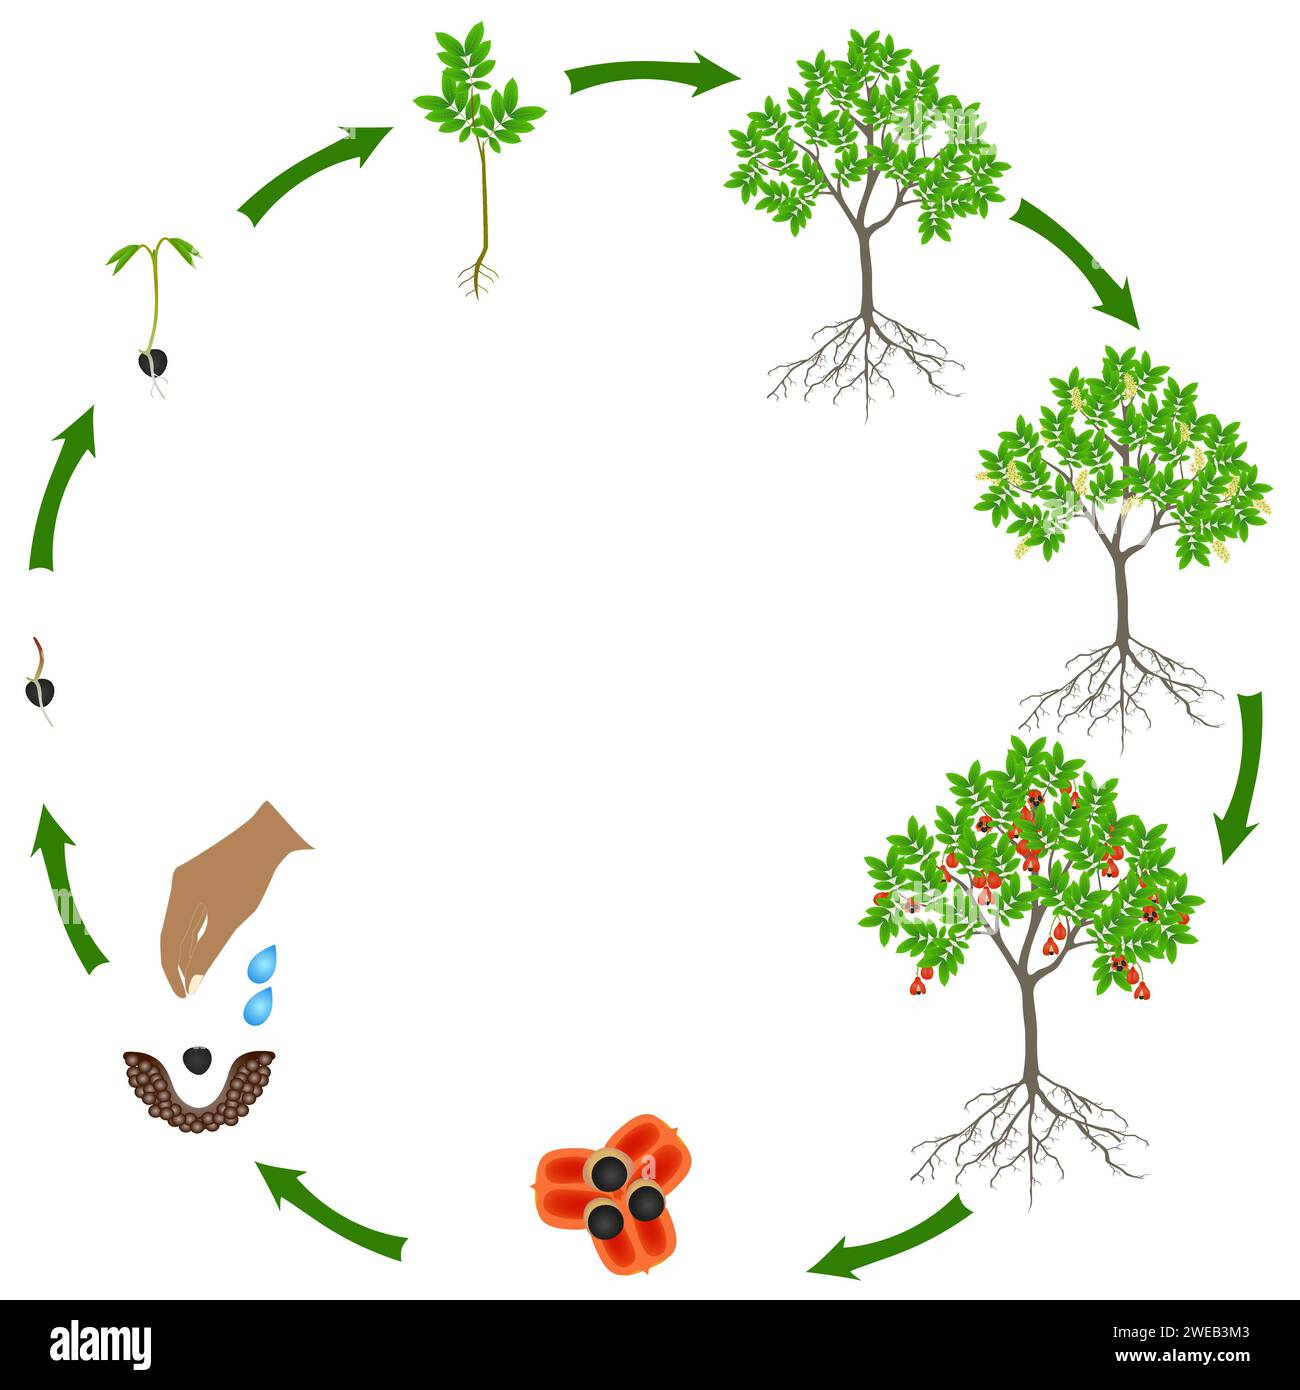 Life cycle of blighia sapida tree on a white background. Stock Vector